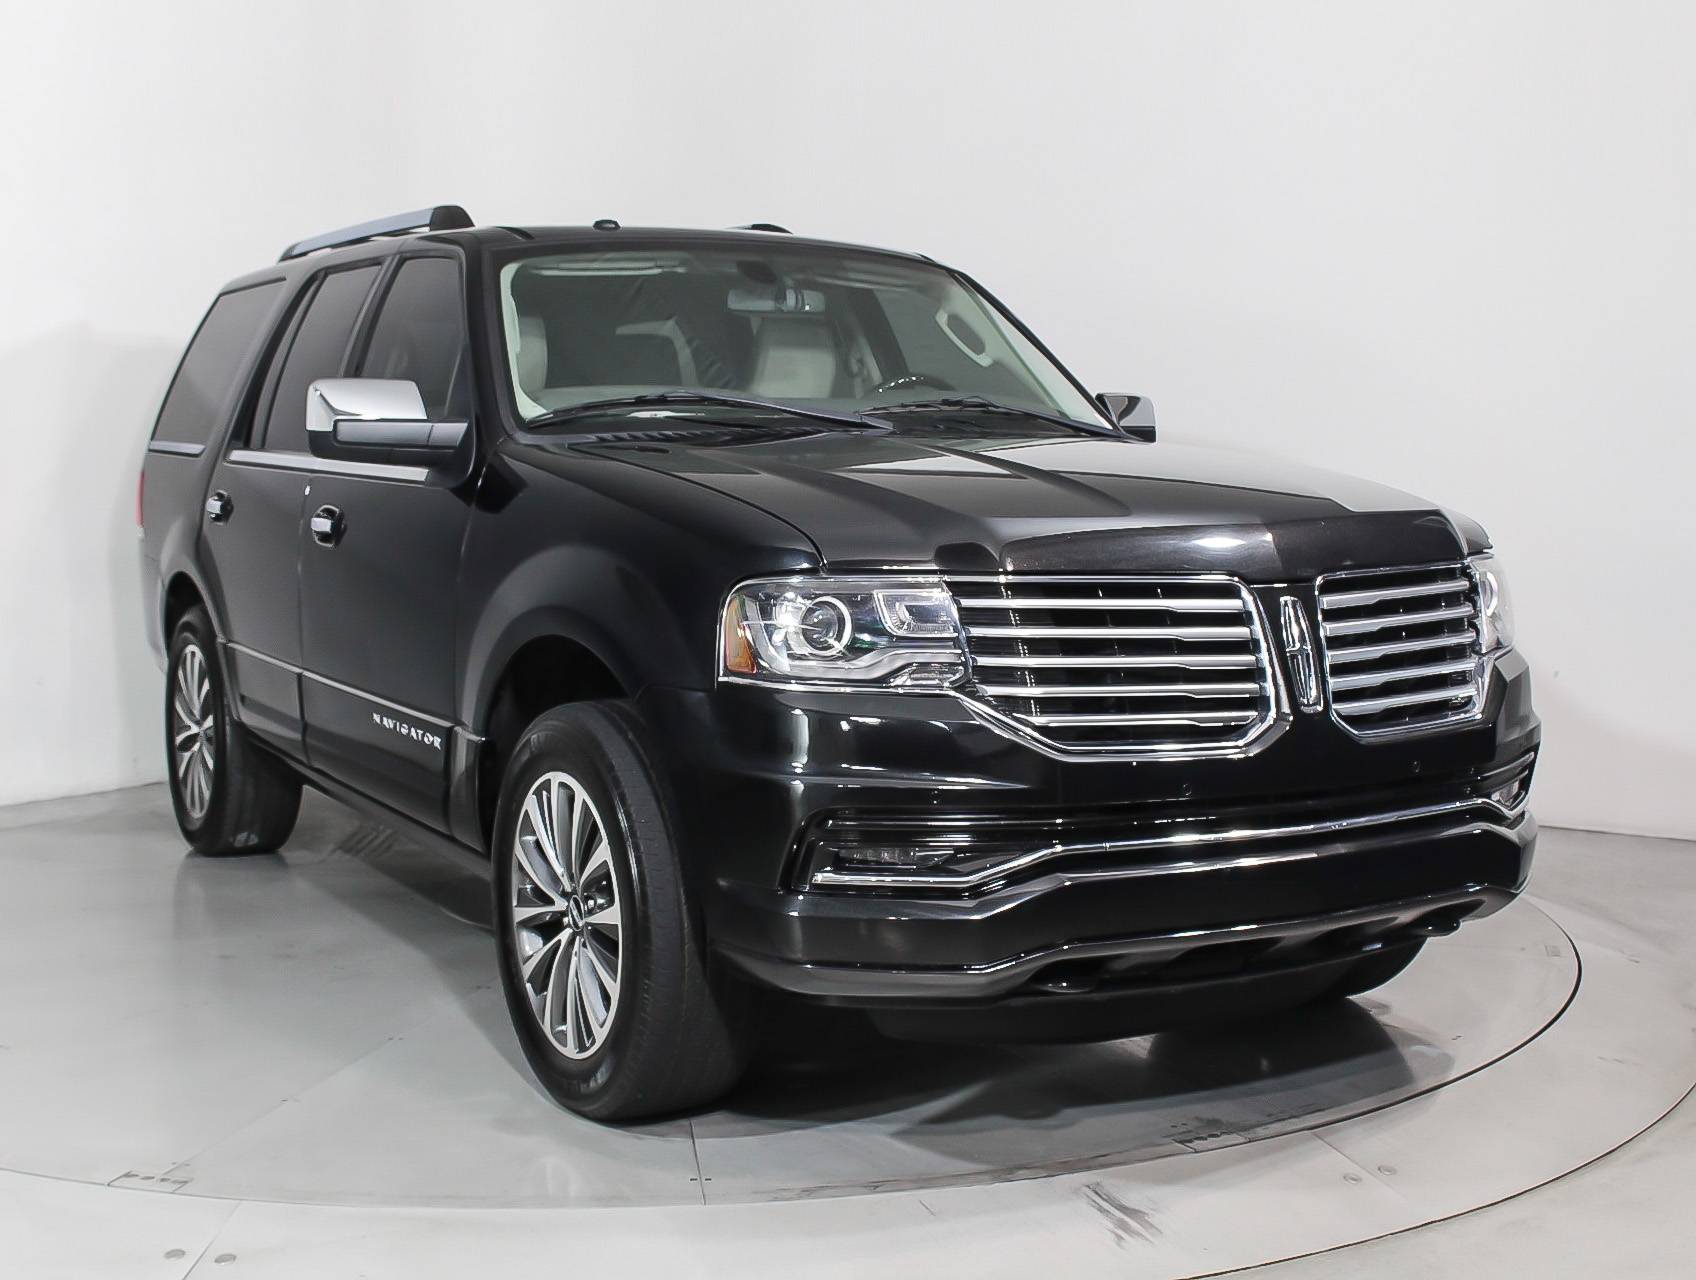 Florida Fine Cars - Used LINCOLN NAVIGATOR 2015 WEST PALM 